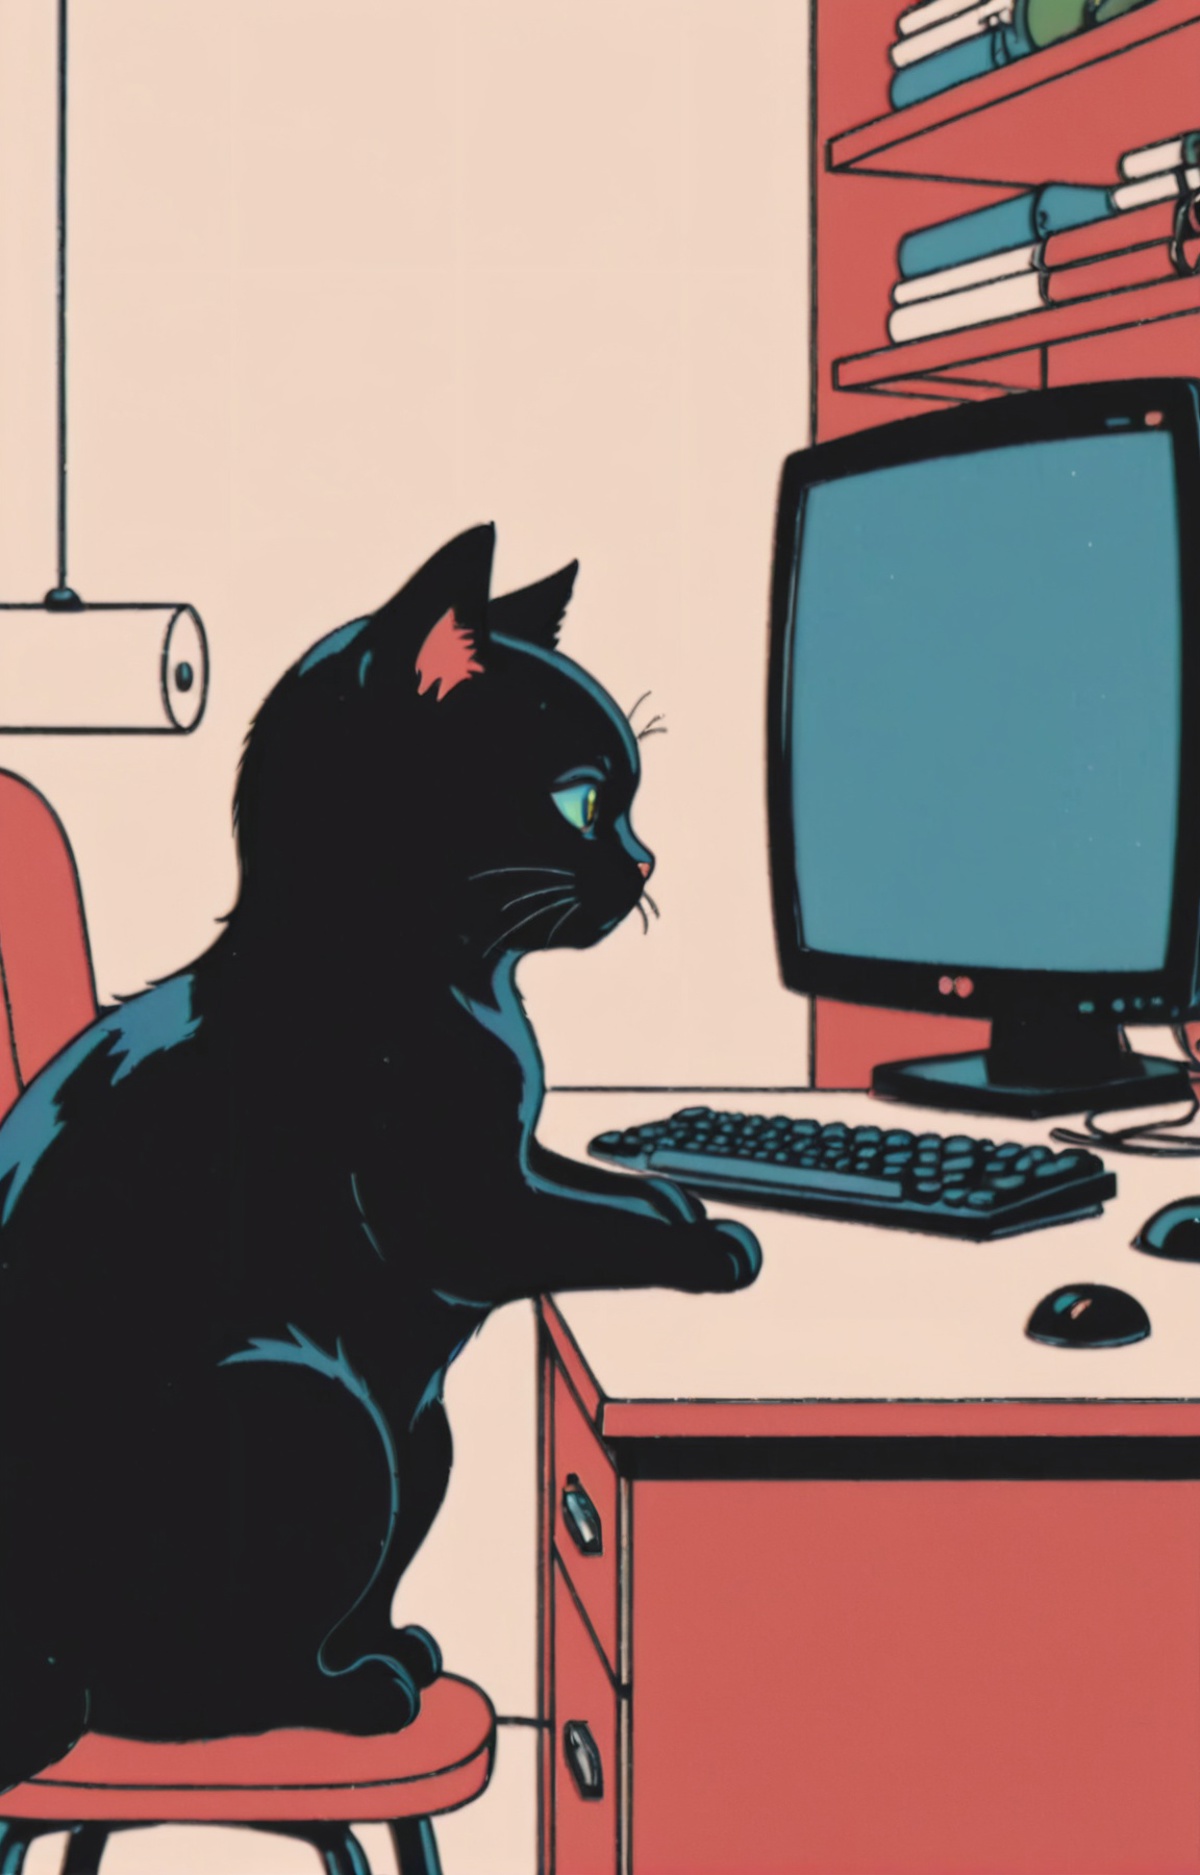 A black cat sitting at a desk in front of a computer, with a keyboard and mouse.